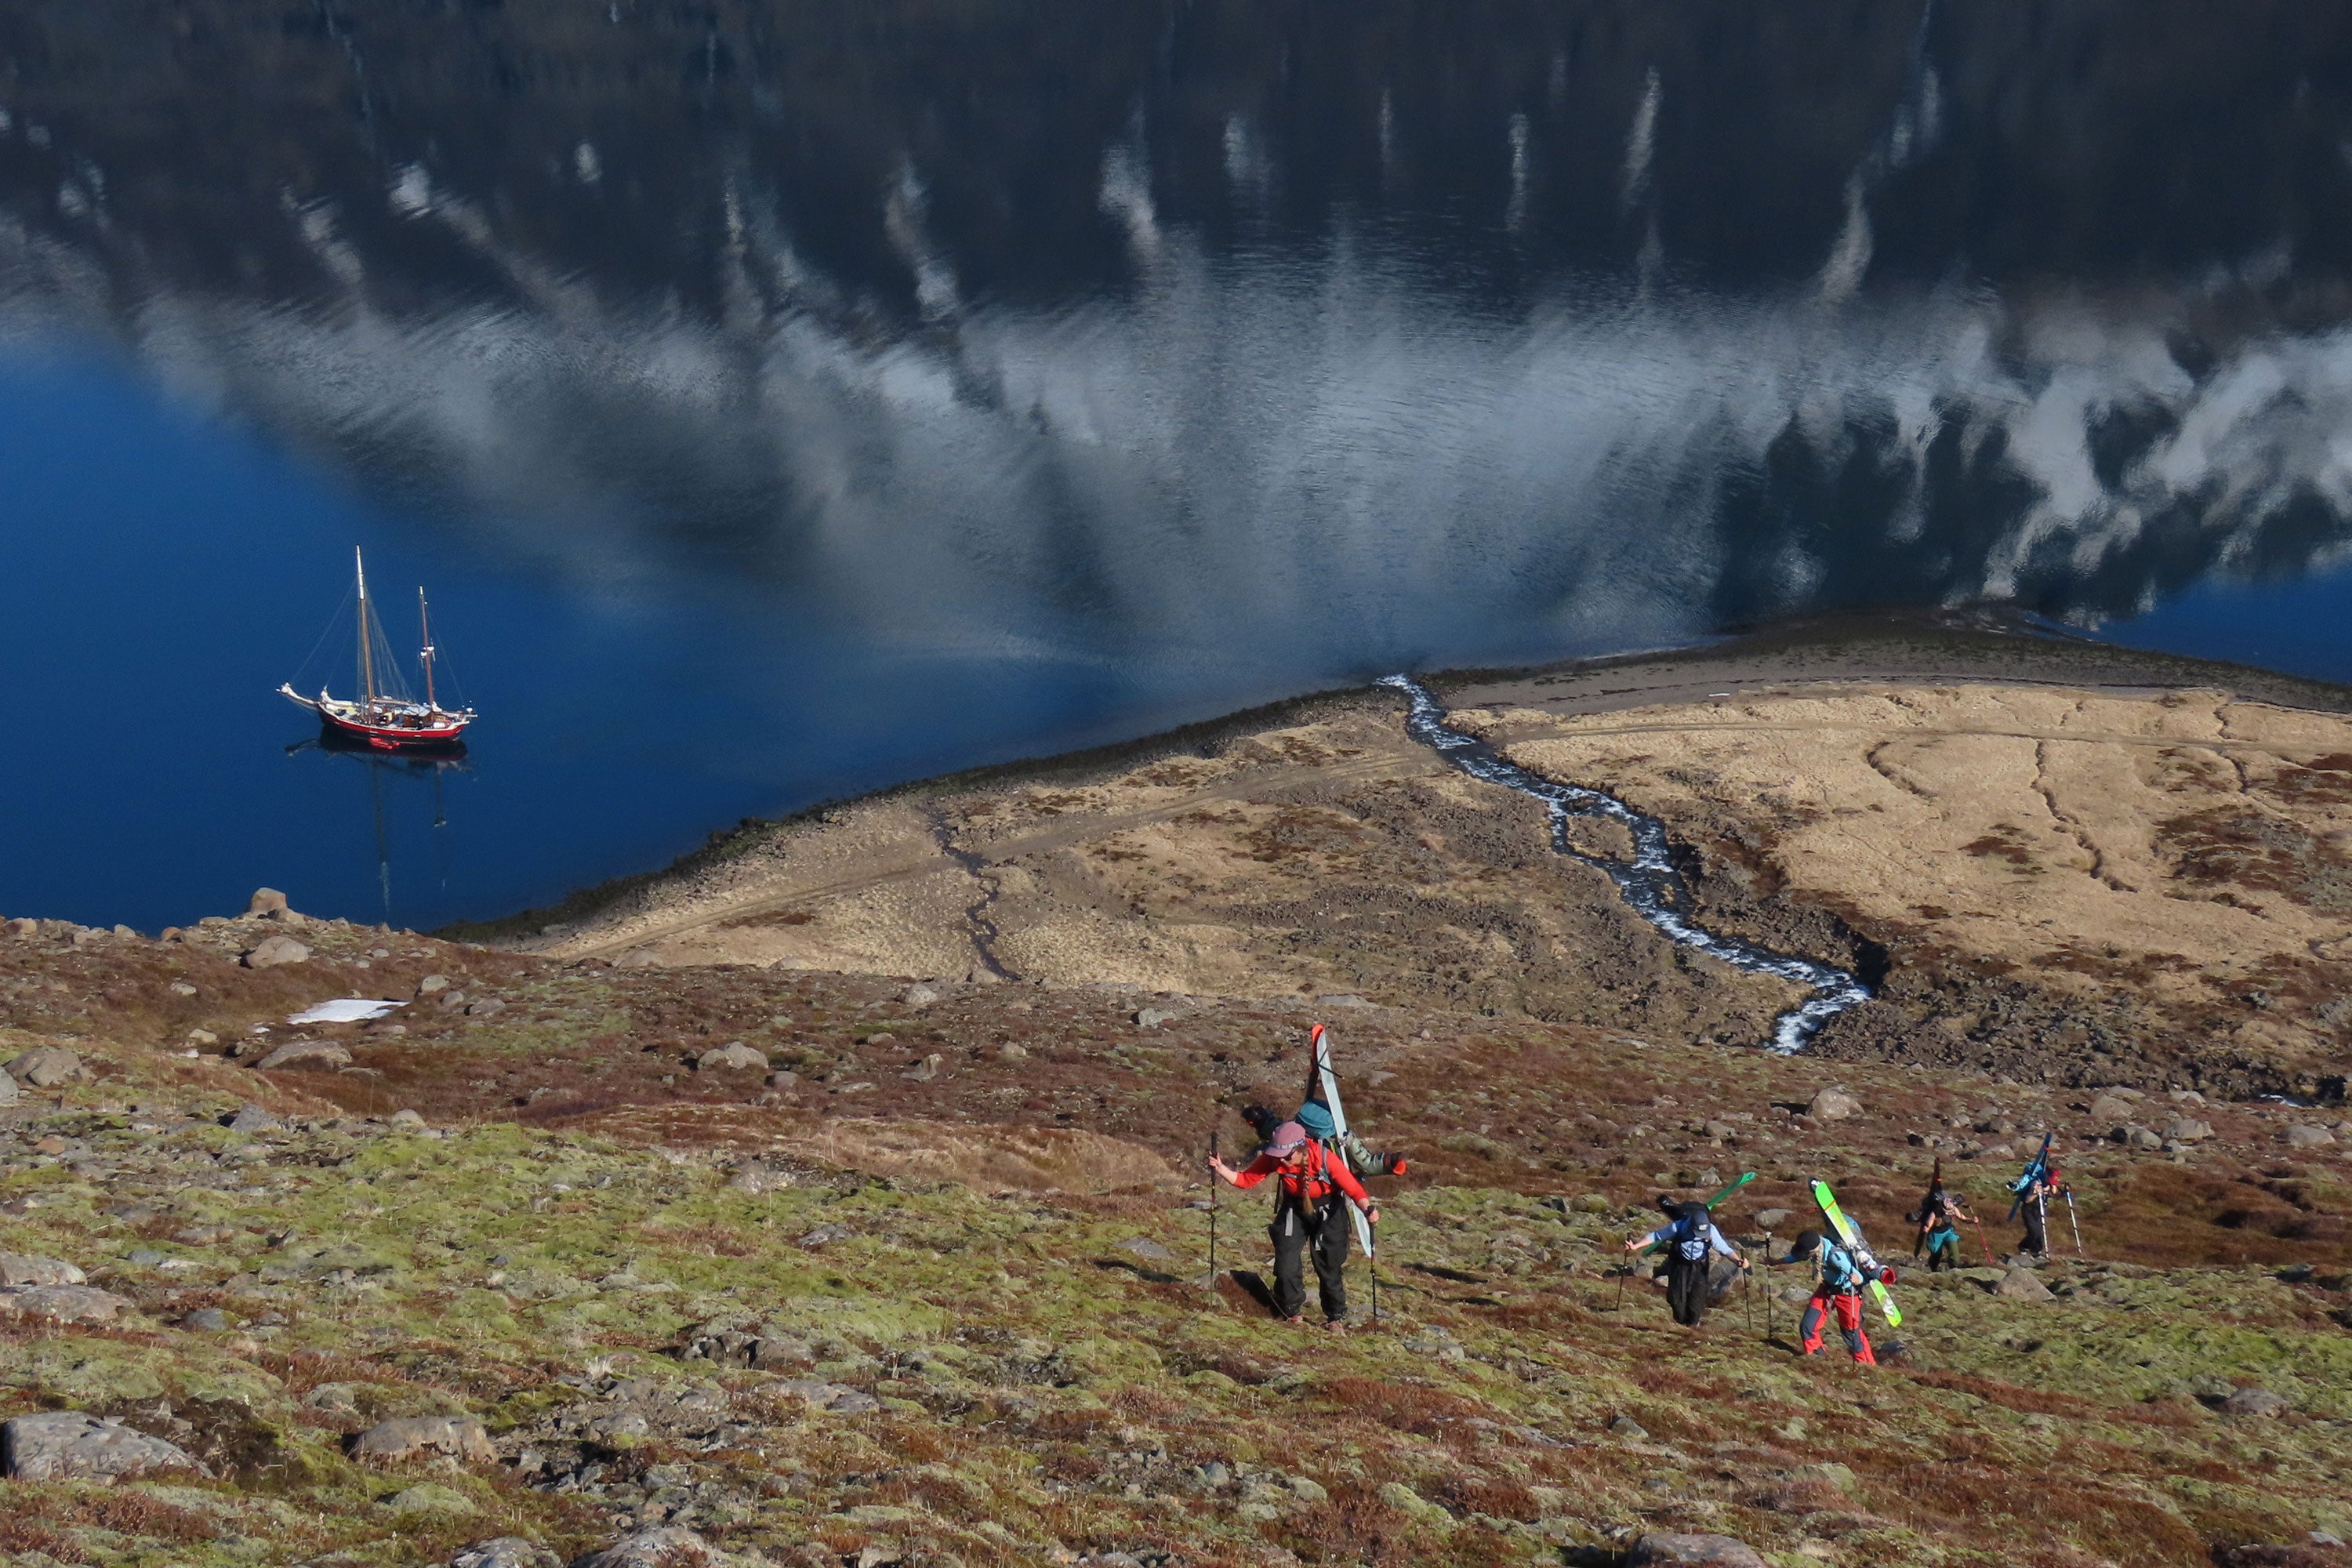 McKenna Peterson and family climbing up a mountain with their boat anchored to the shore below them